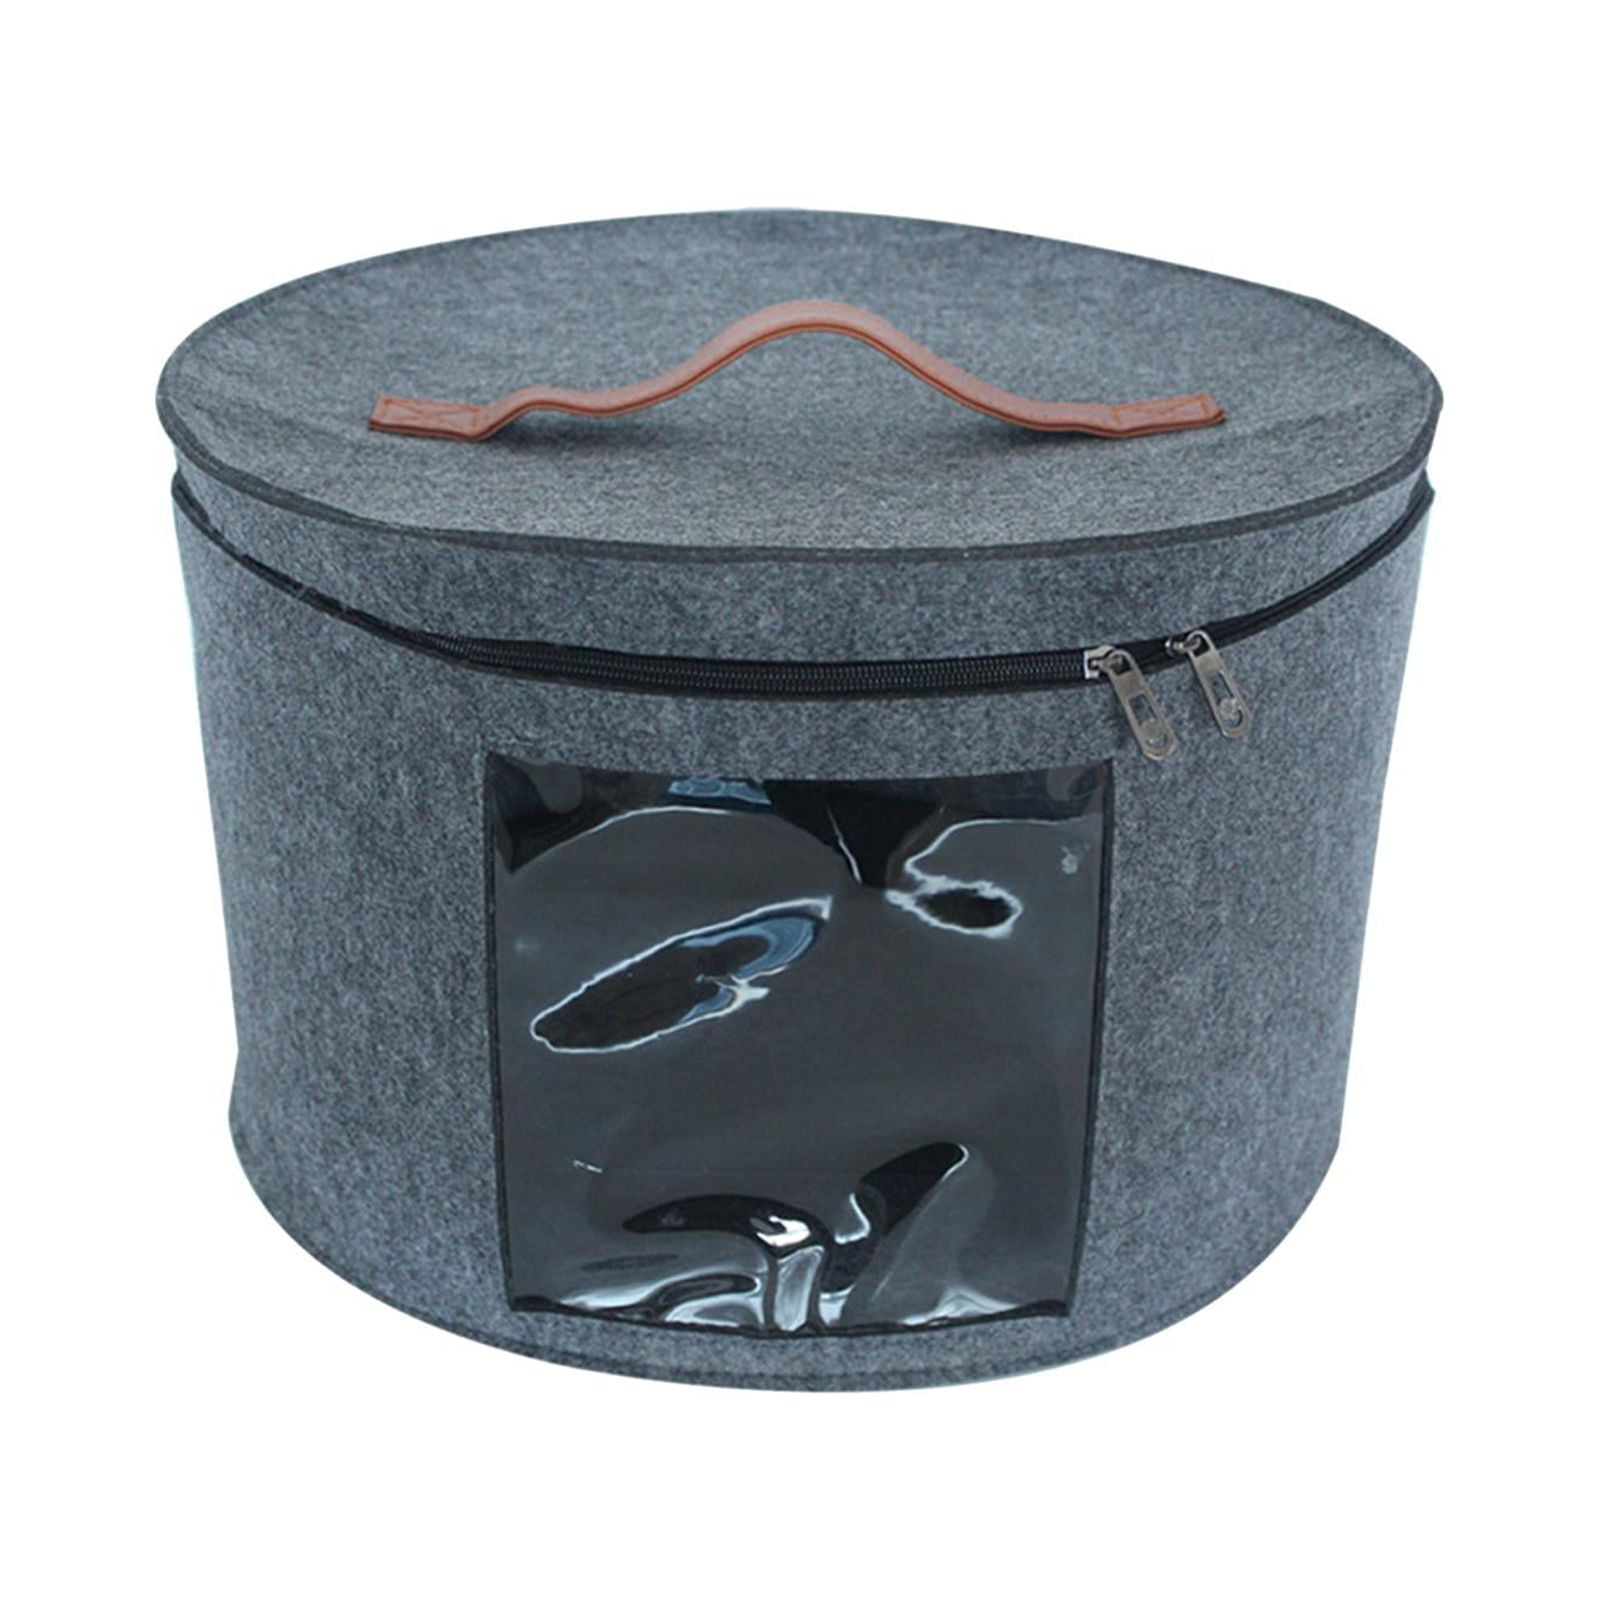 Relax love Hat Box Organizer 17x17x10in Large Capacity Gray Felt Hat  Storage Container Round Foldable Double Opening Zipper Dust-Proof with  Visible